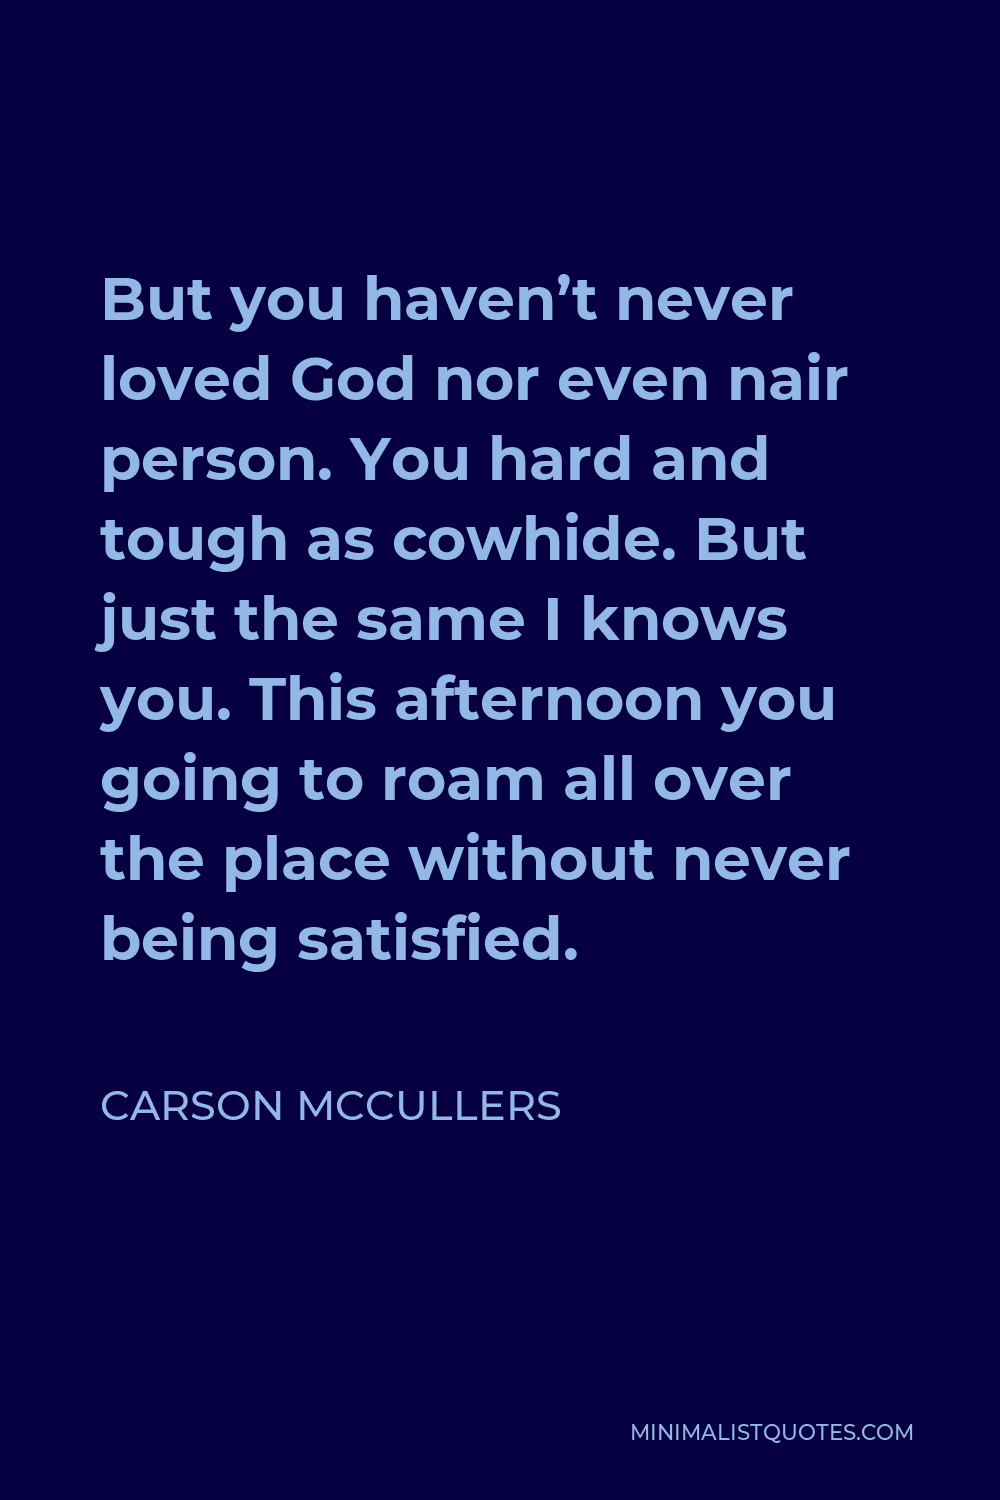 Carson McCullers Quote - But you haven’t never loved God nor even nair person. You hard and tough as cowhide. But just the same I knows you. This afternoon you going to roam all over the place without never being satisfied.